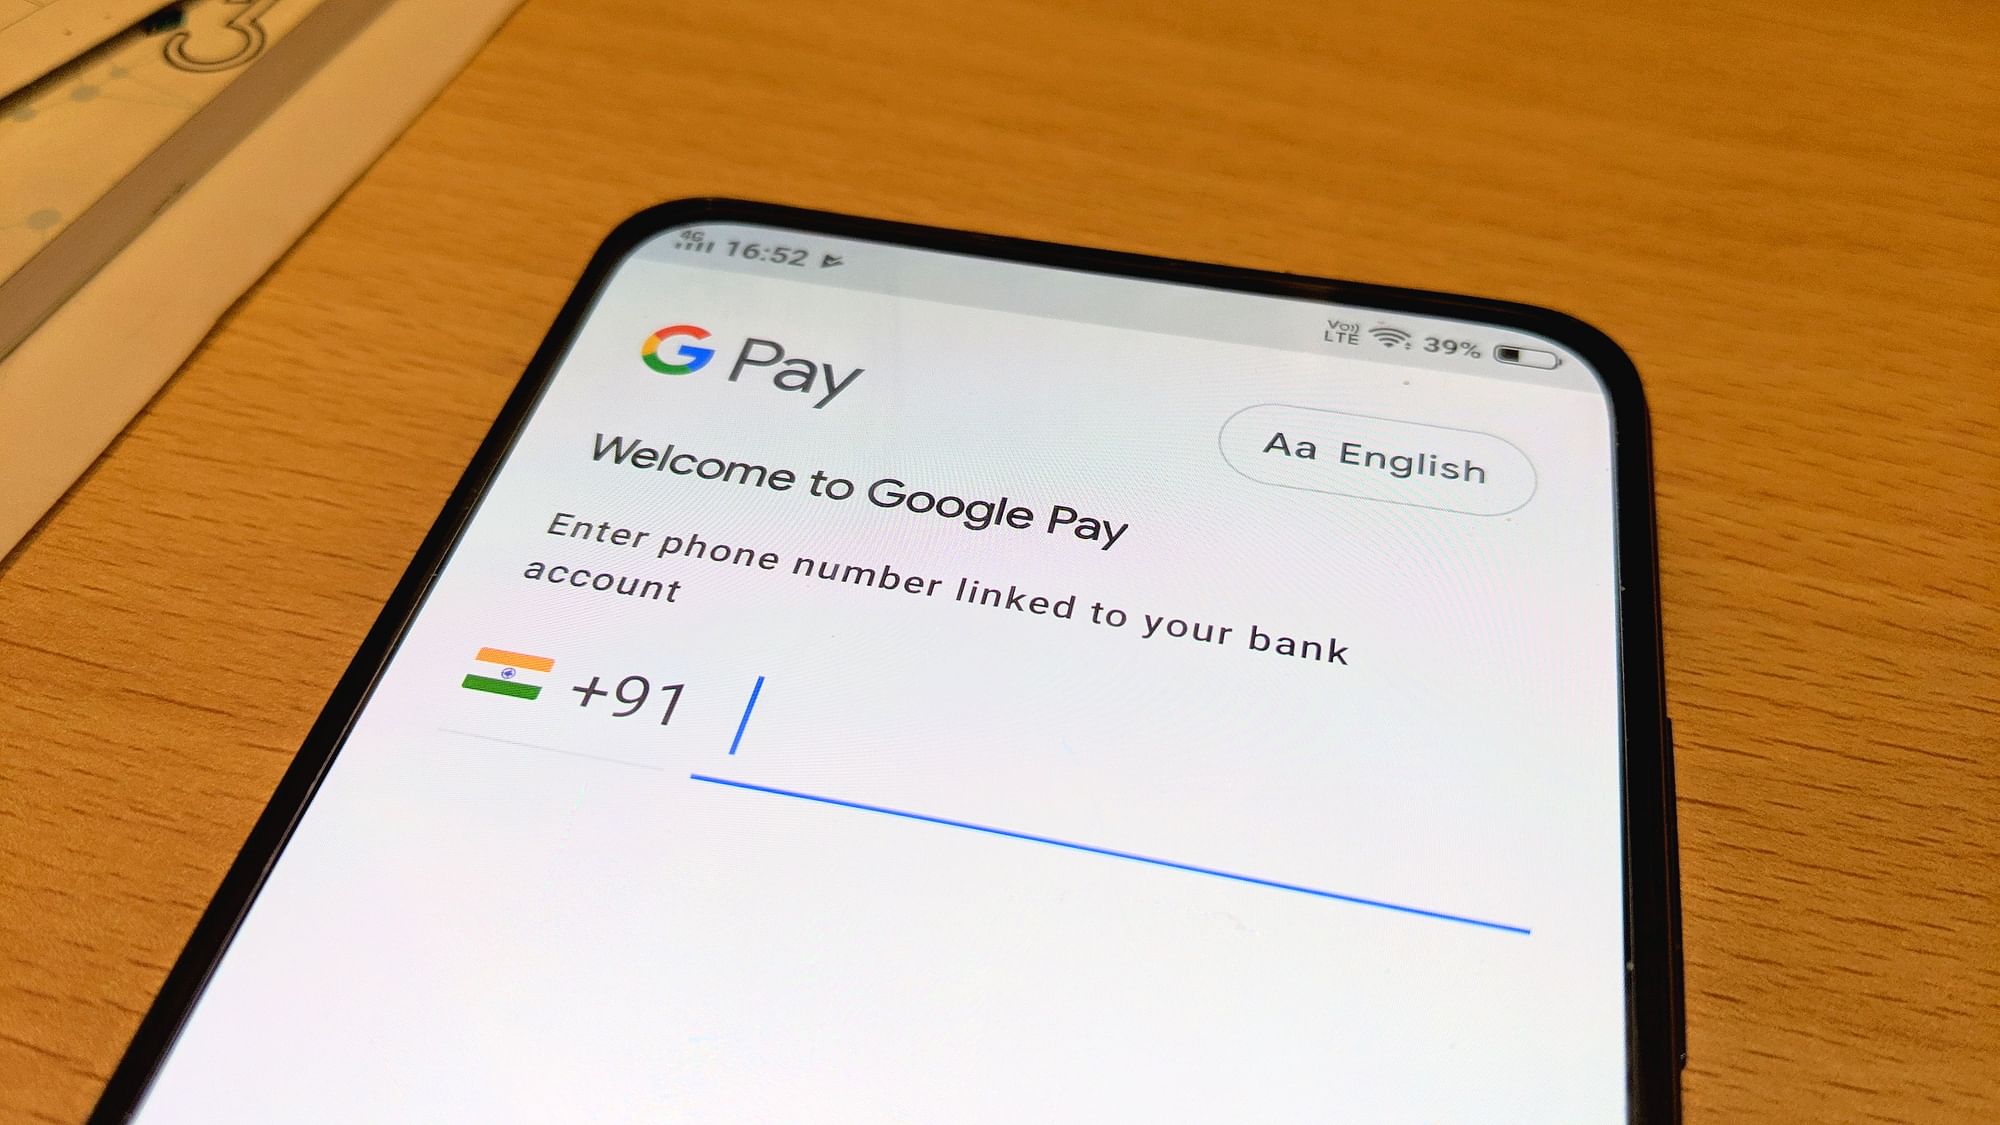 Google Pay is looking to monetize GPay Users data in India.